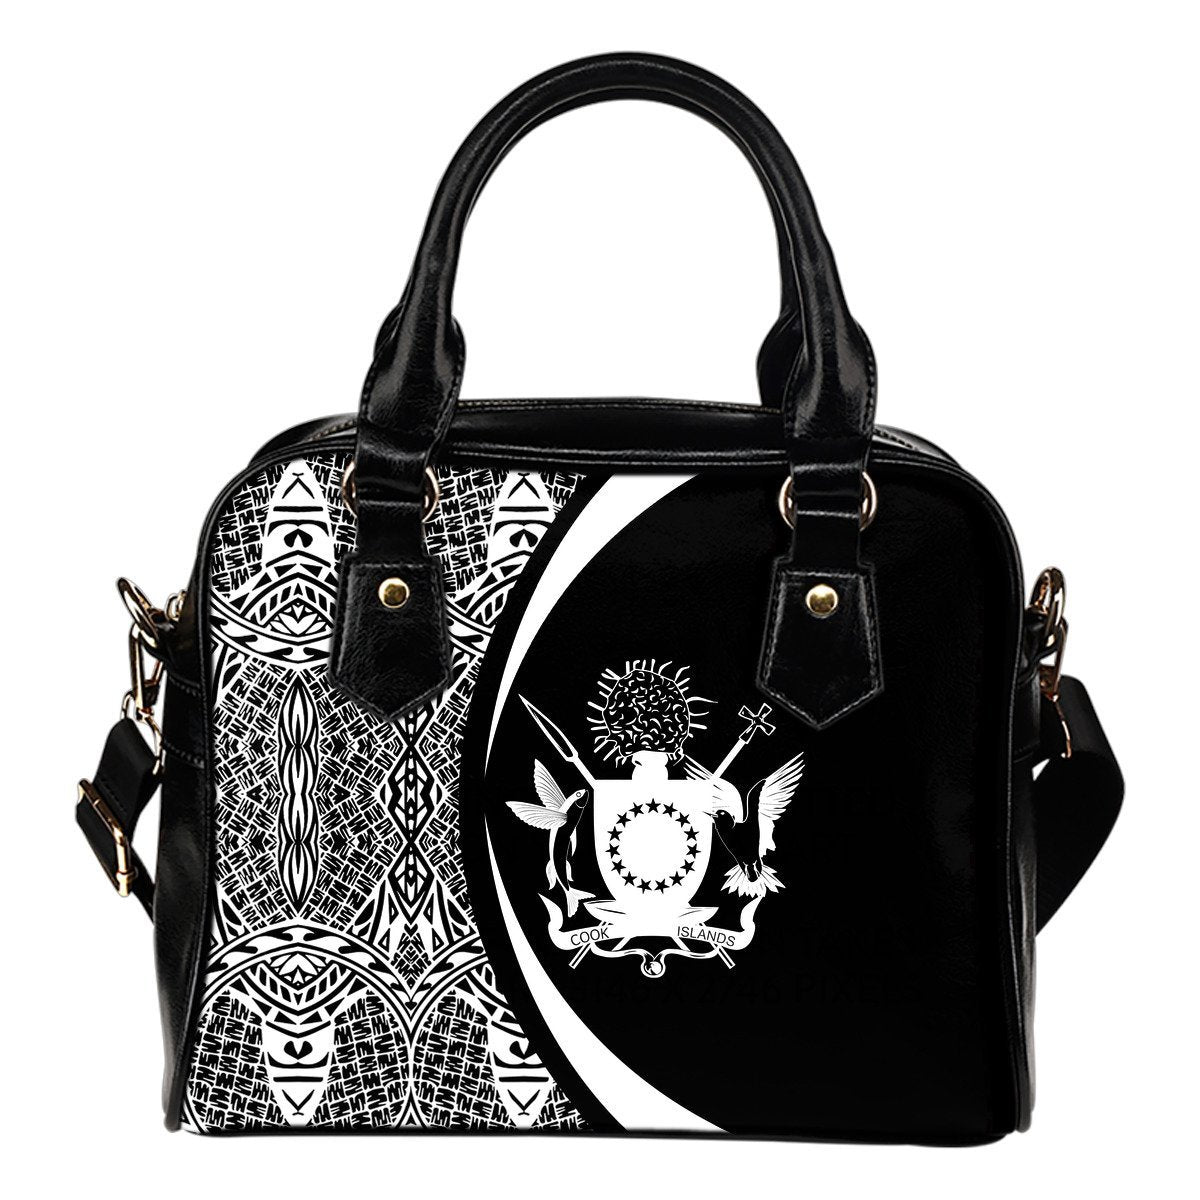 Cook Islands Coat Of Arms Polynesian Shoulder Handbag - Circle Style - 01 One Size Black And White - Polynesian Pride